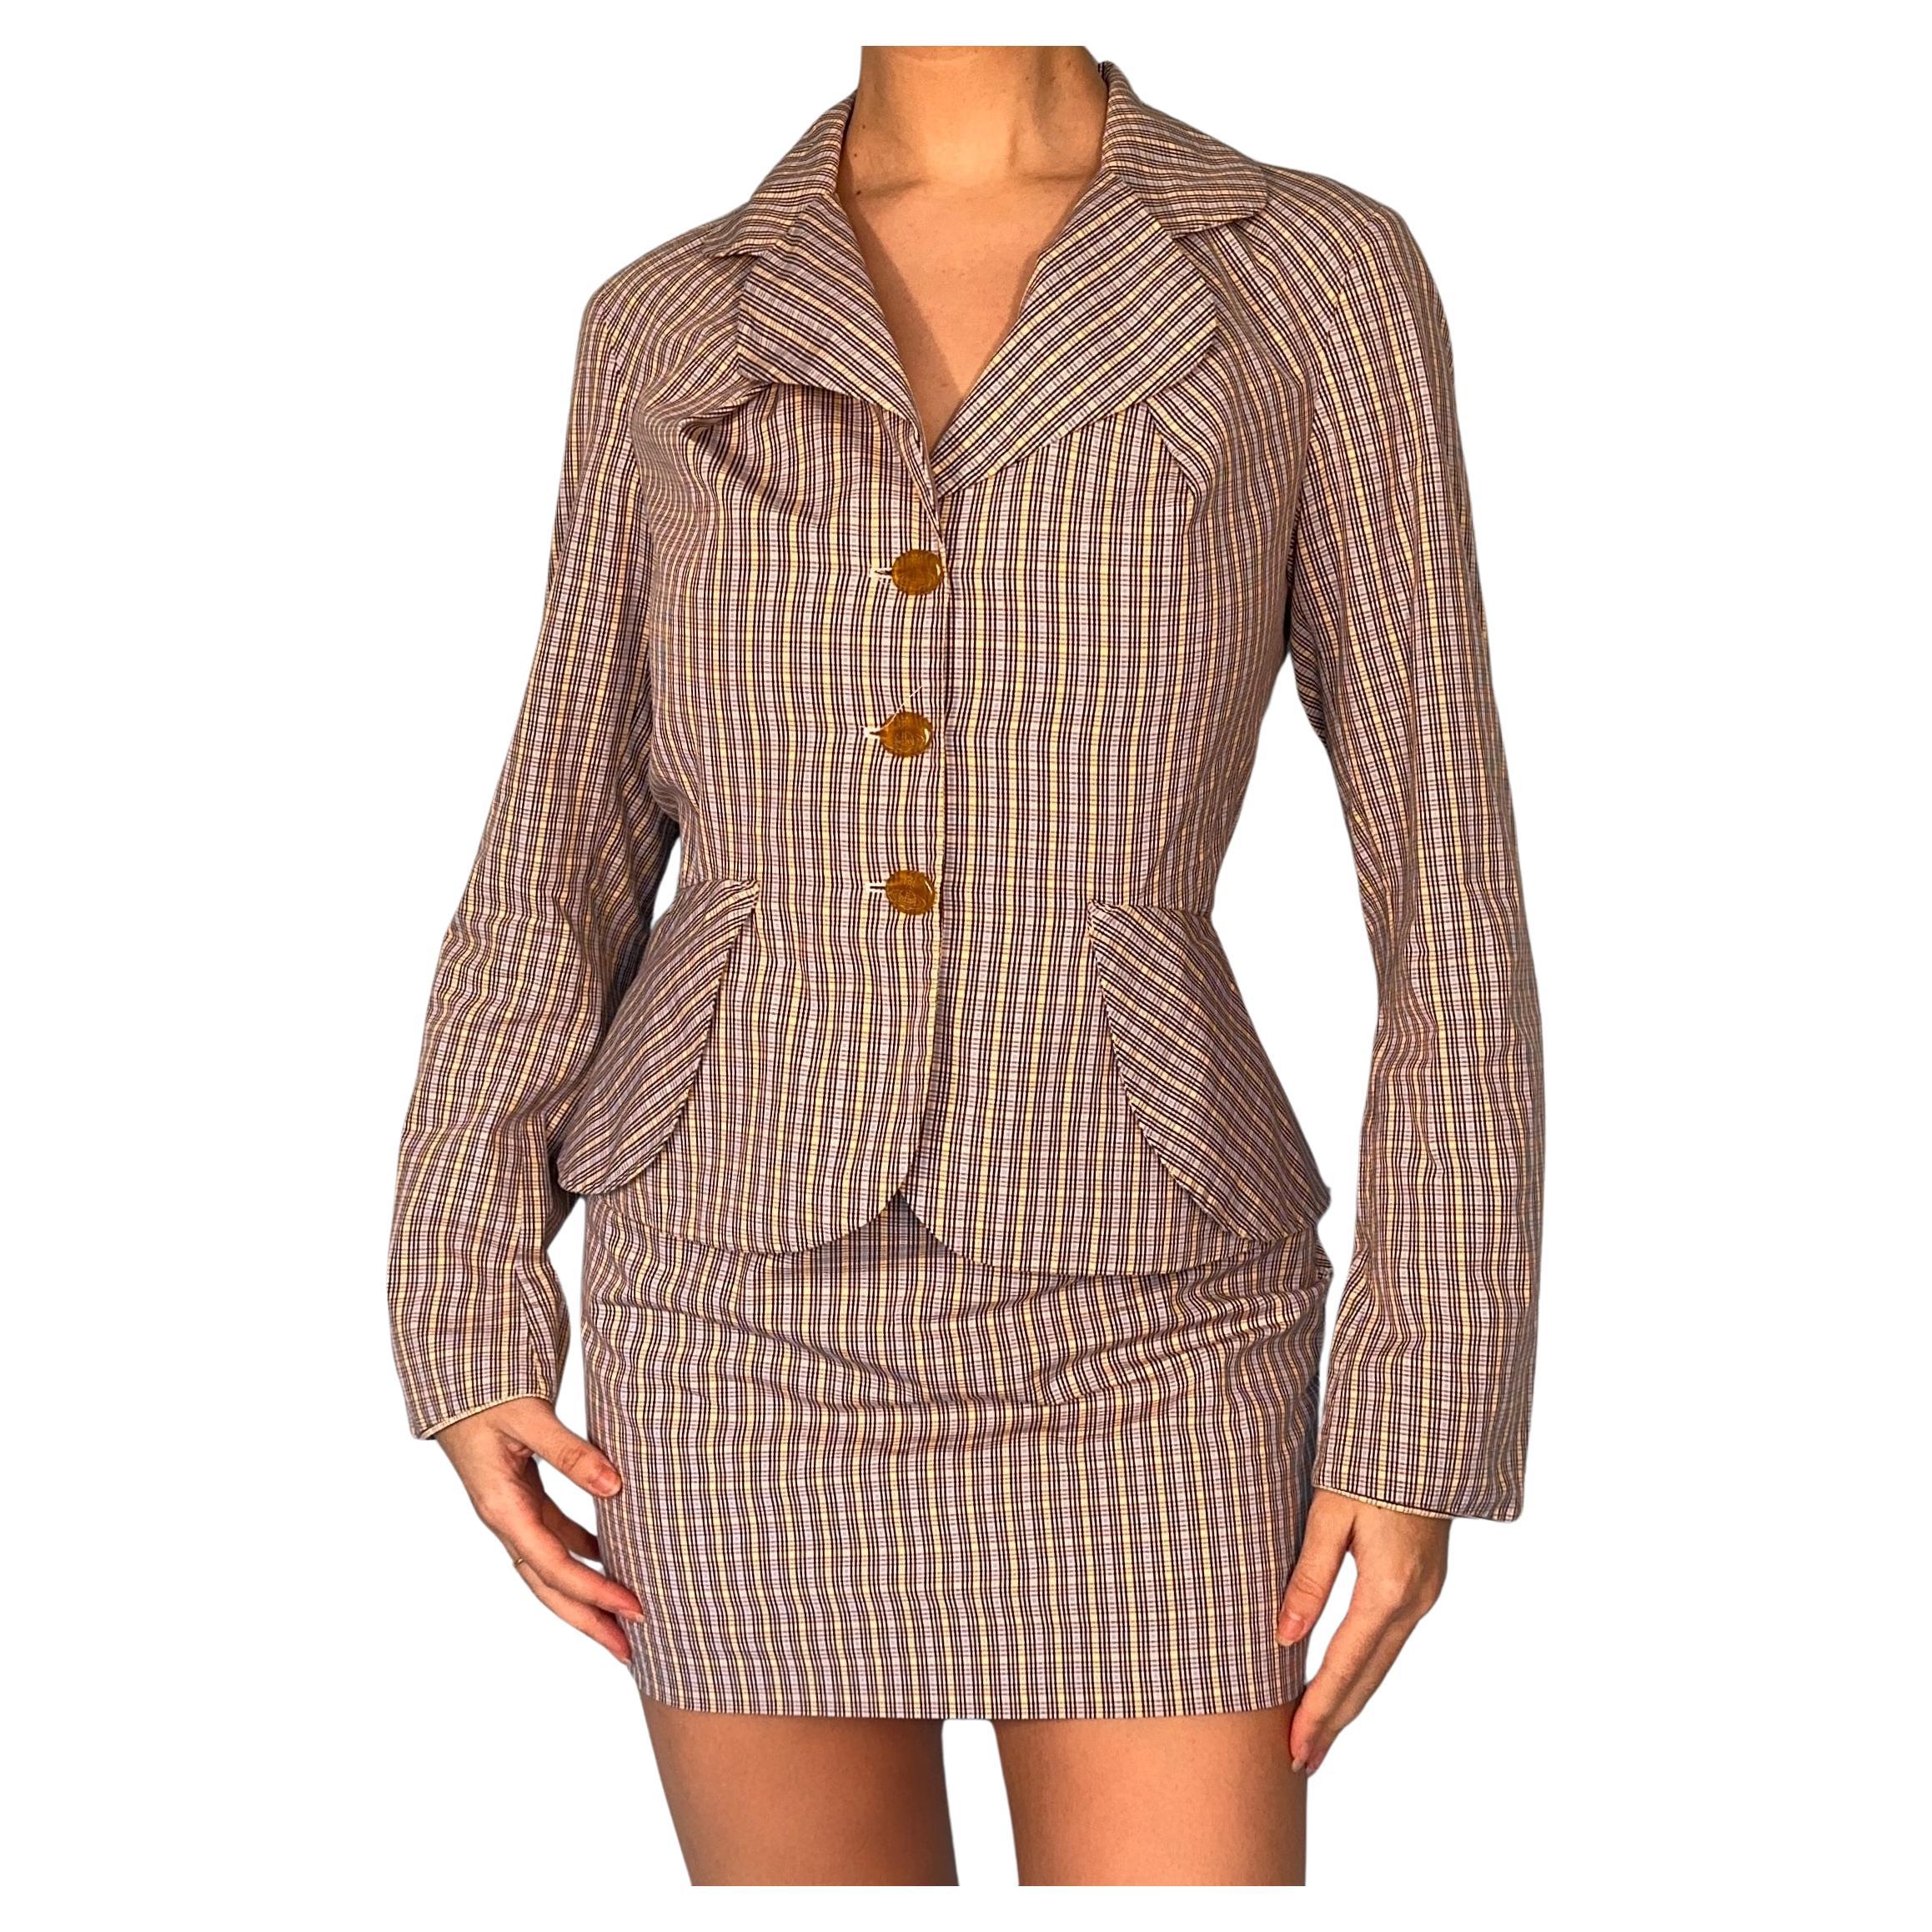 Vivienne Westwood Spring 1994 Checked Two Piece Skirt Suit Set For Sale